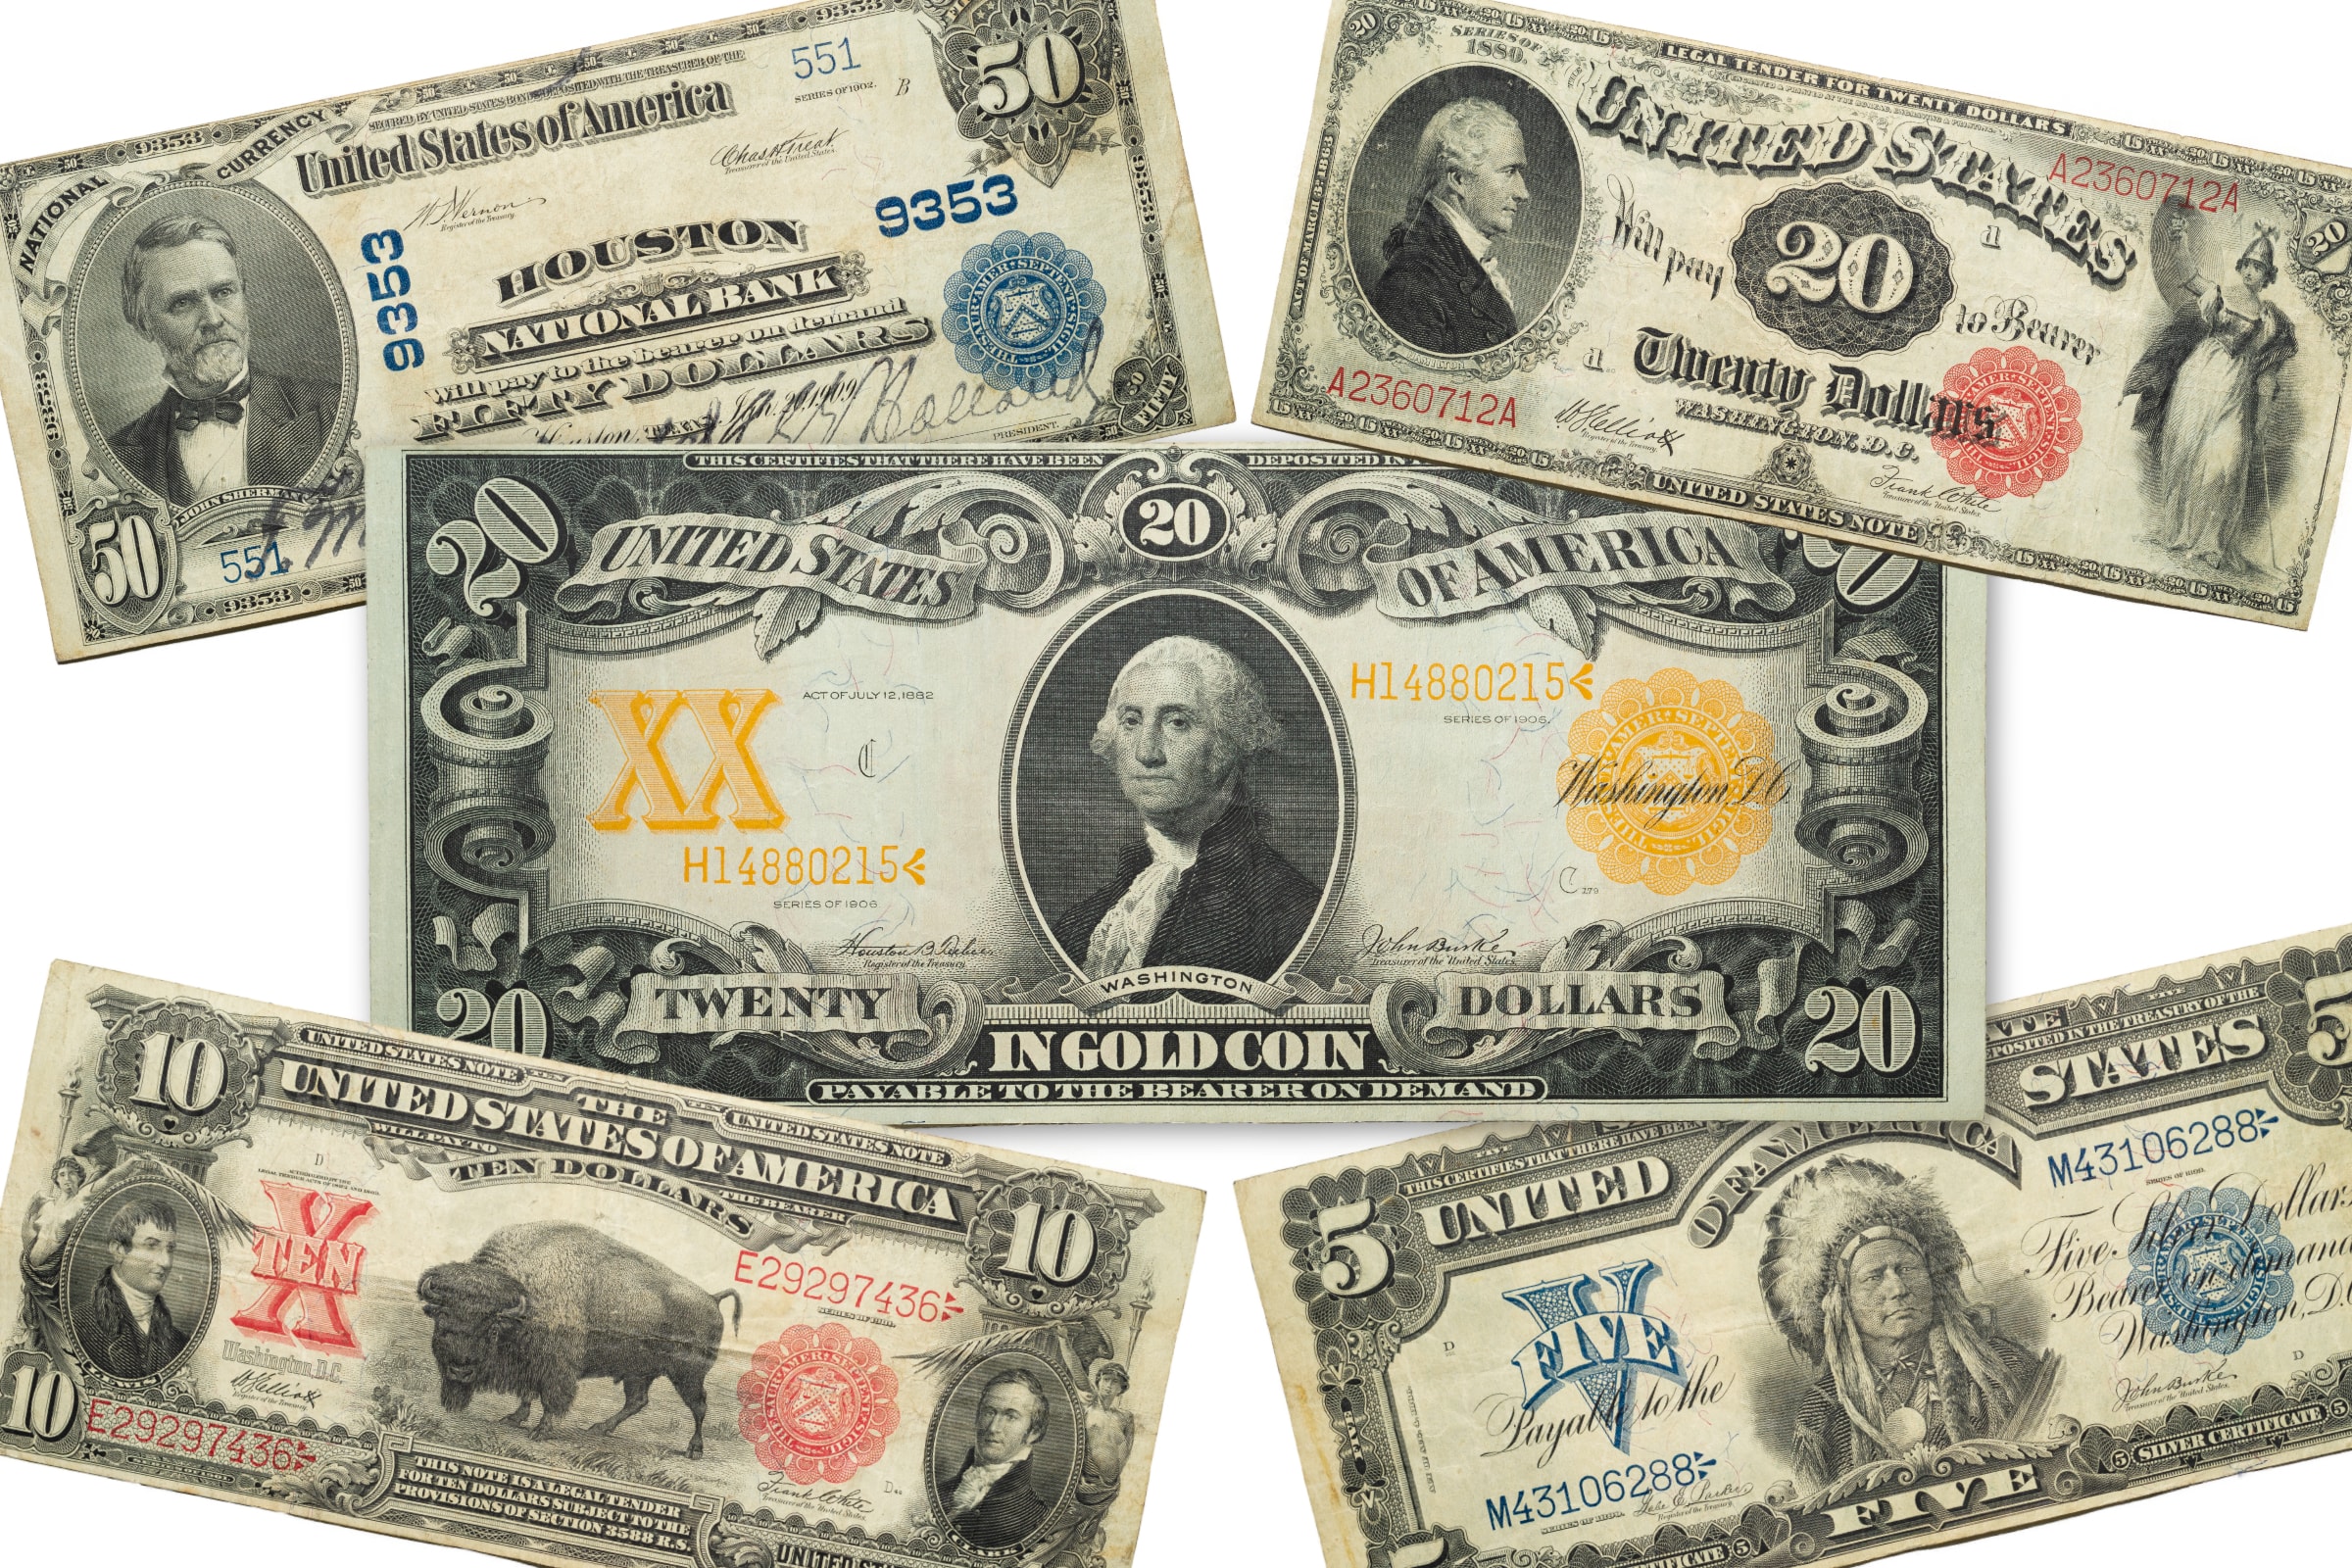 United States Paper Currency Live Simulcast Auction Harritt Group Inc